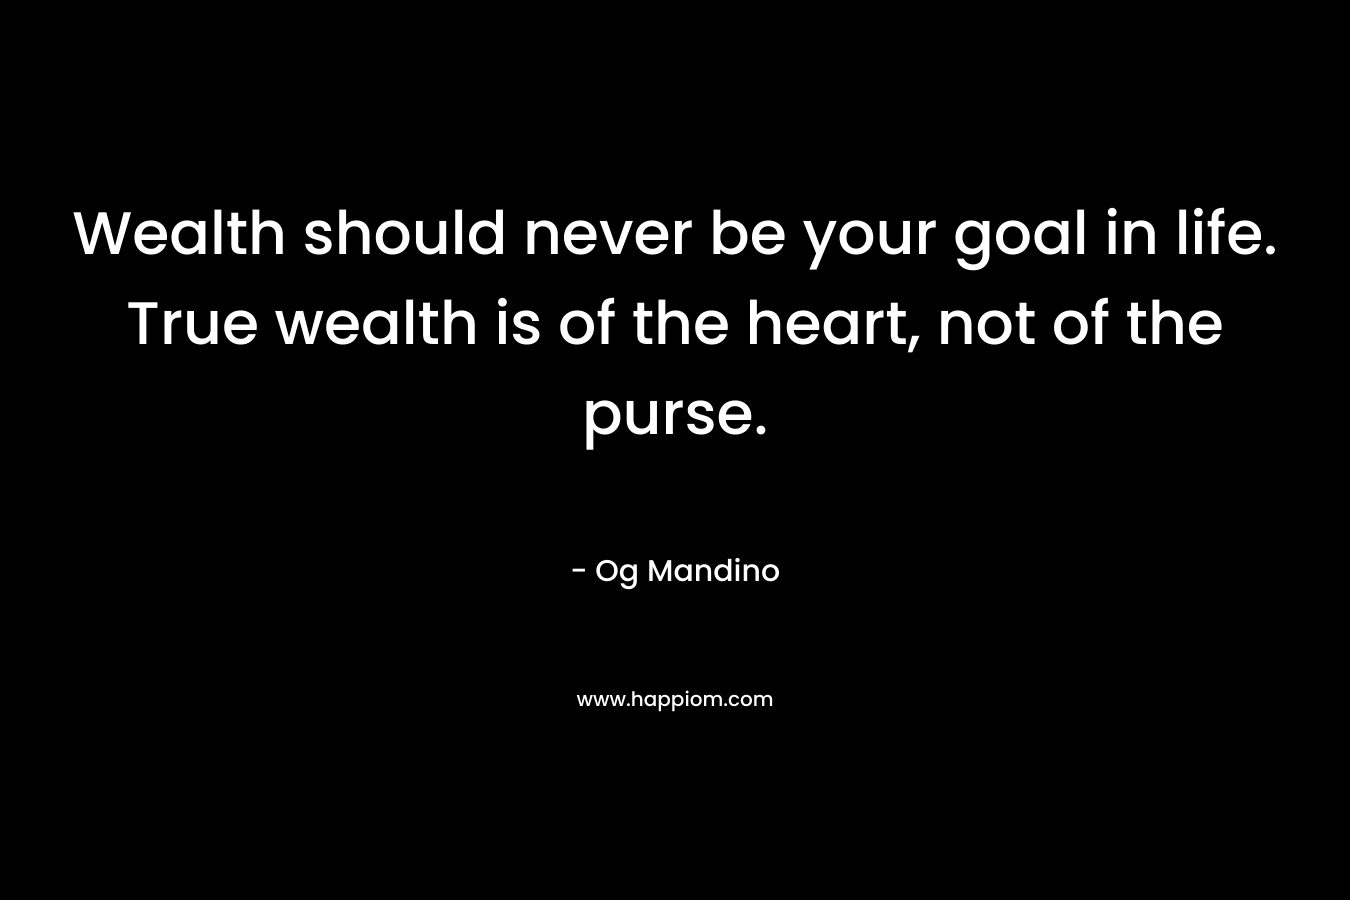 Wealth should never be your goal in life. True wealth is of the heart, not of the purse. – Og Mandino